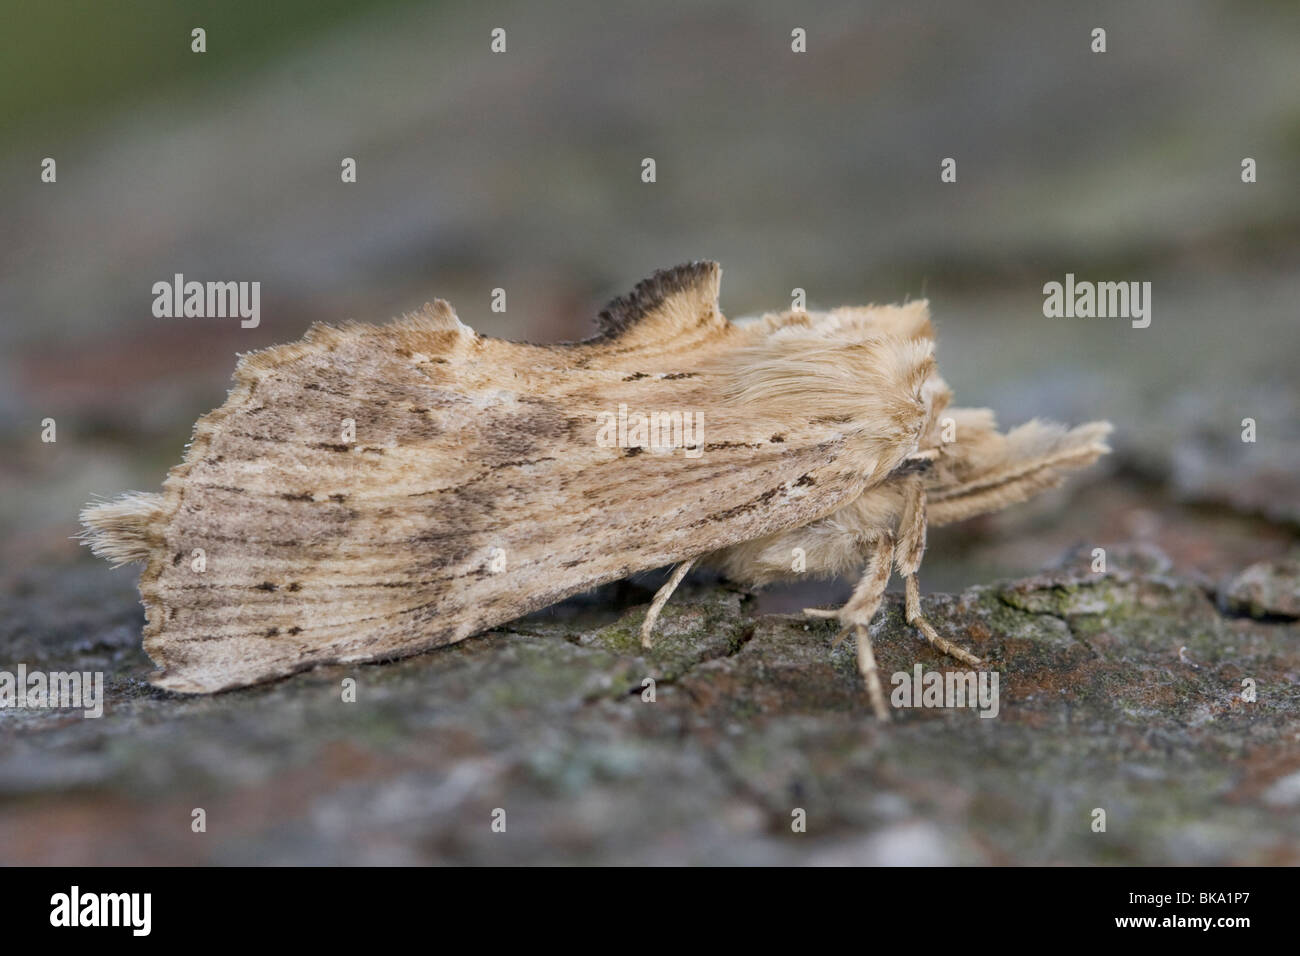 A Pale Prominent (Pterostoma palpina) resting on the bark of a branch. Stock Photo